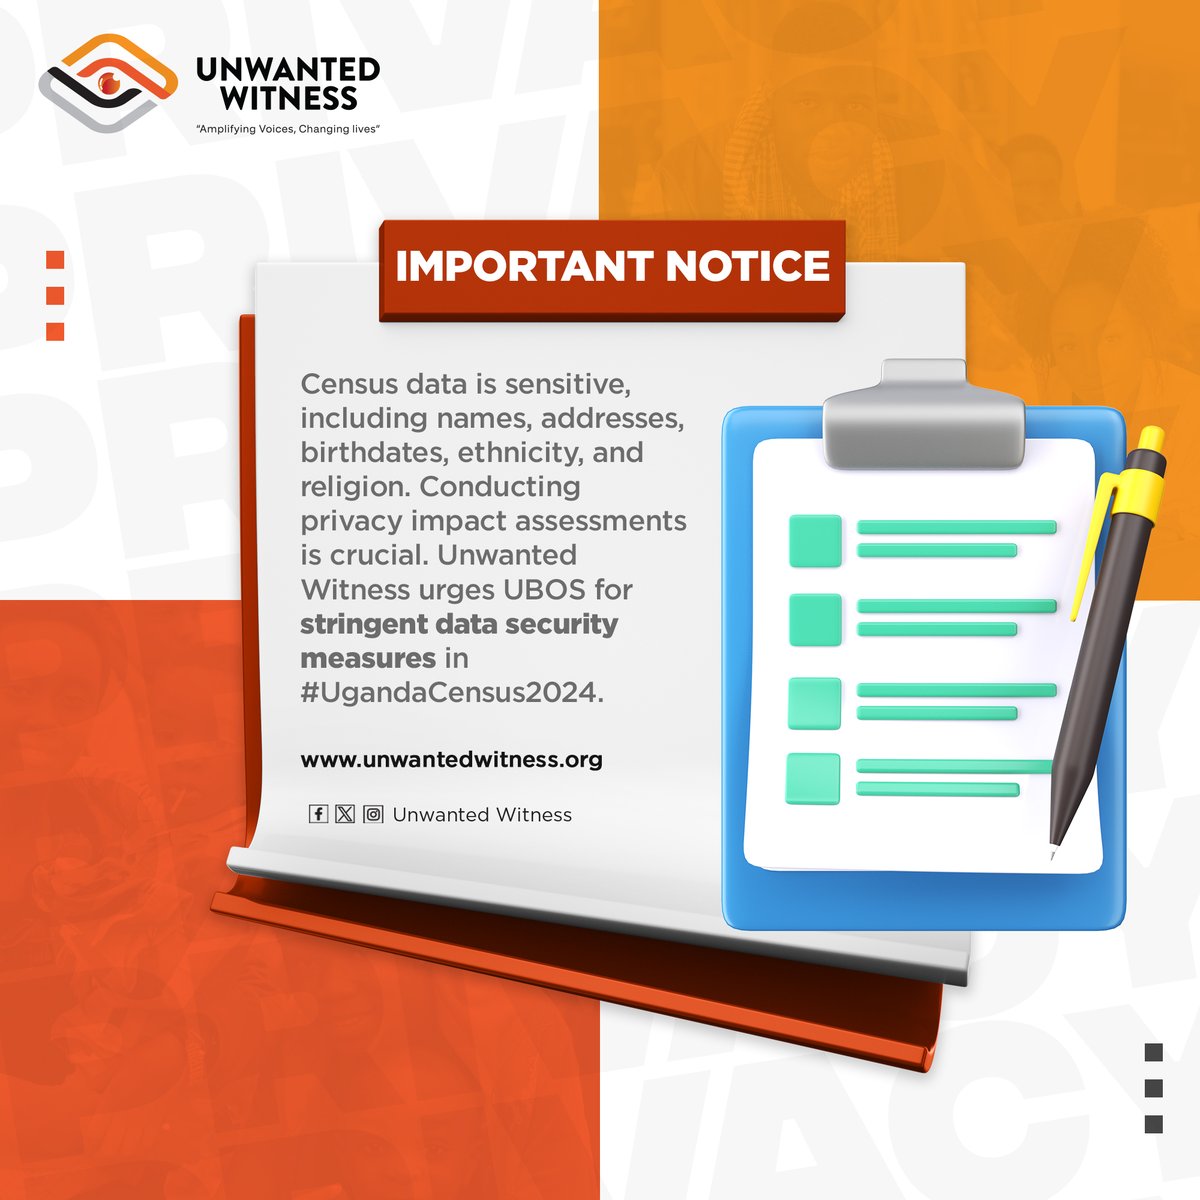 If you must collect it, you must protect it! As the National Census draws close, we urge UBOS to fortify measures safeguarding individual data confidentiality throughout the enumeration process. #UgandaCensus2024